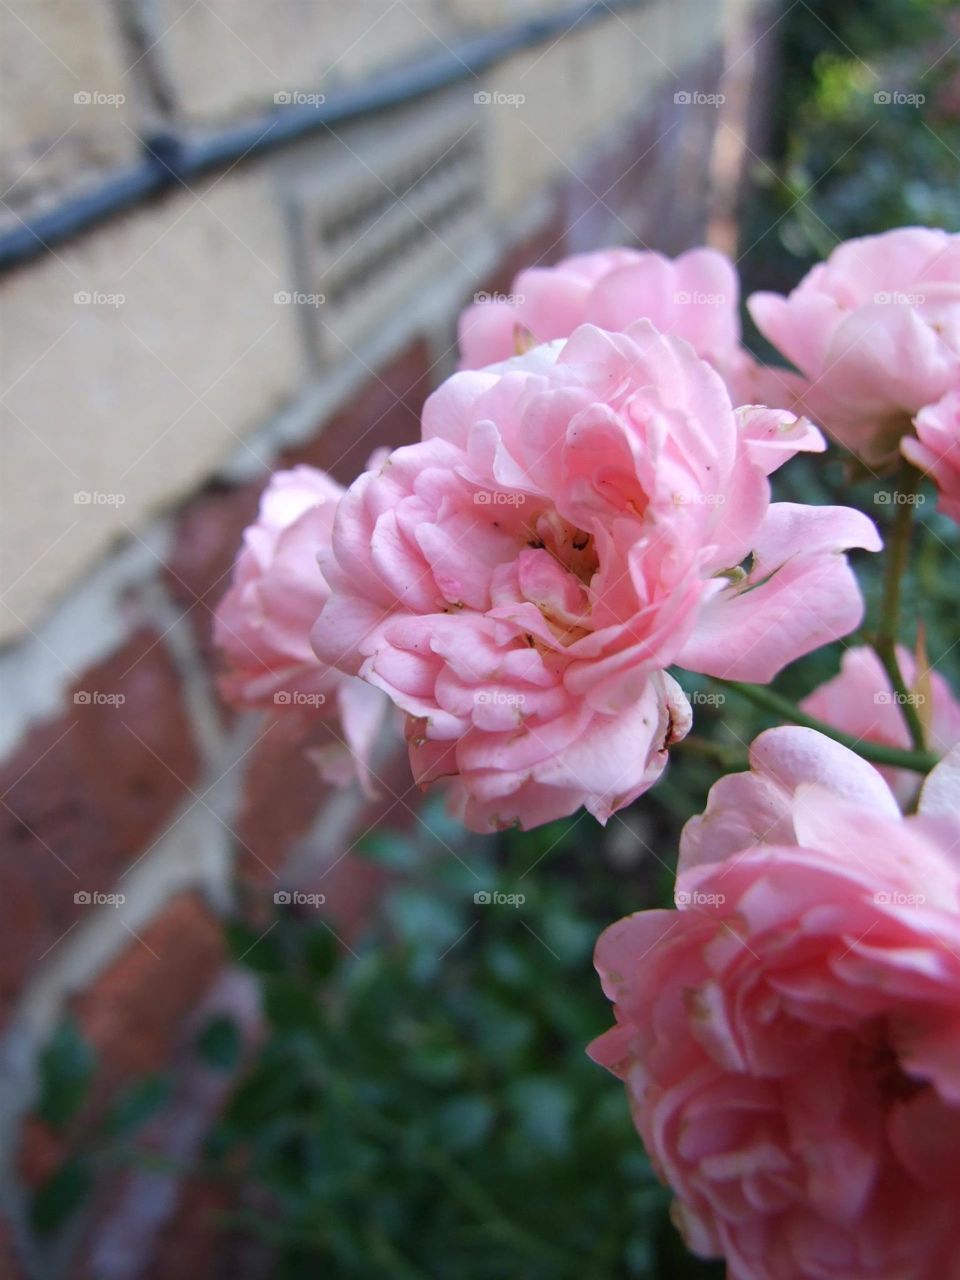 Small, pink rose